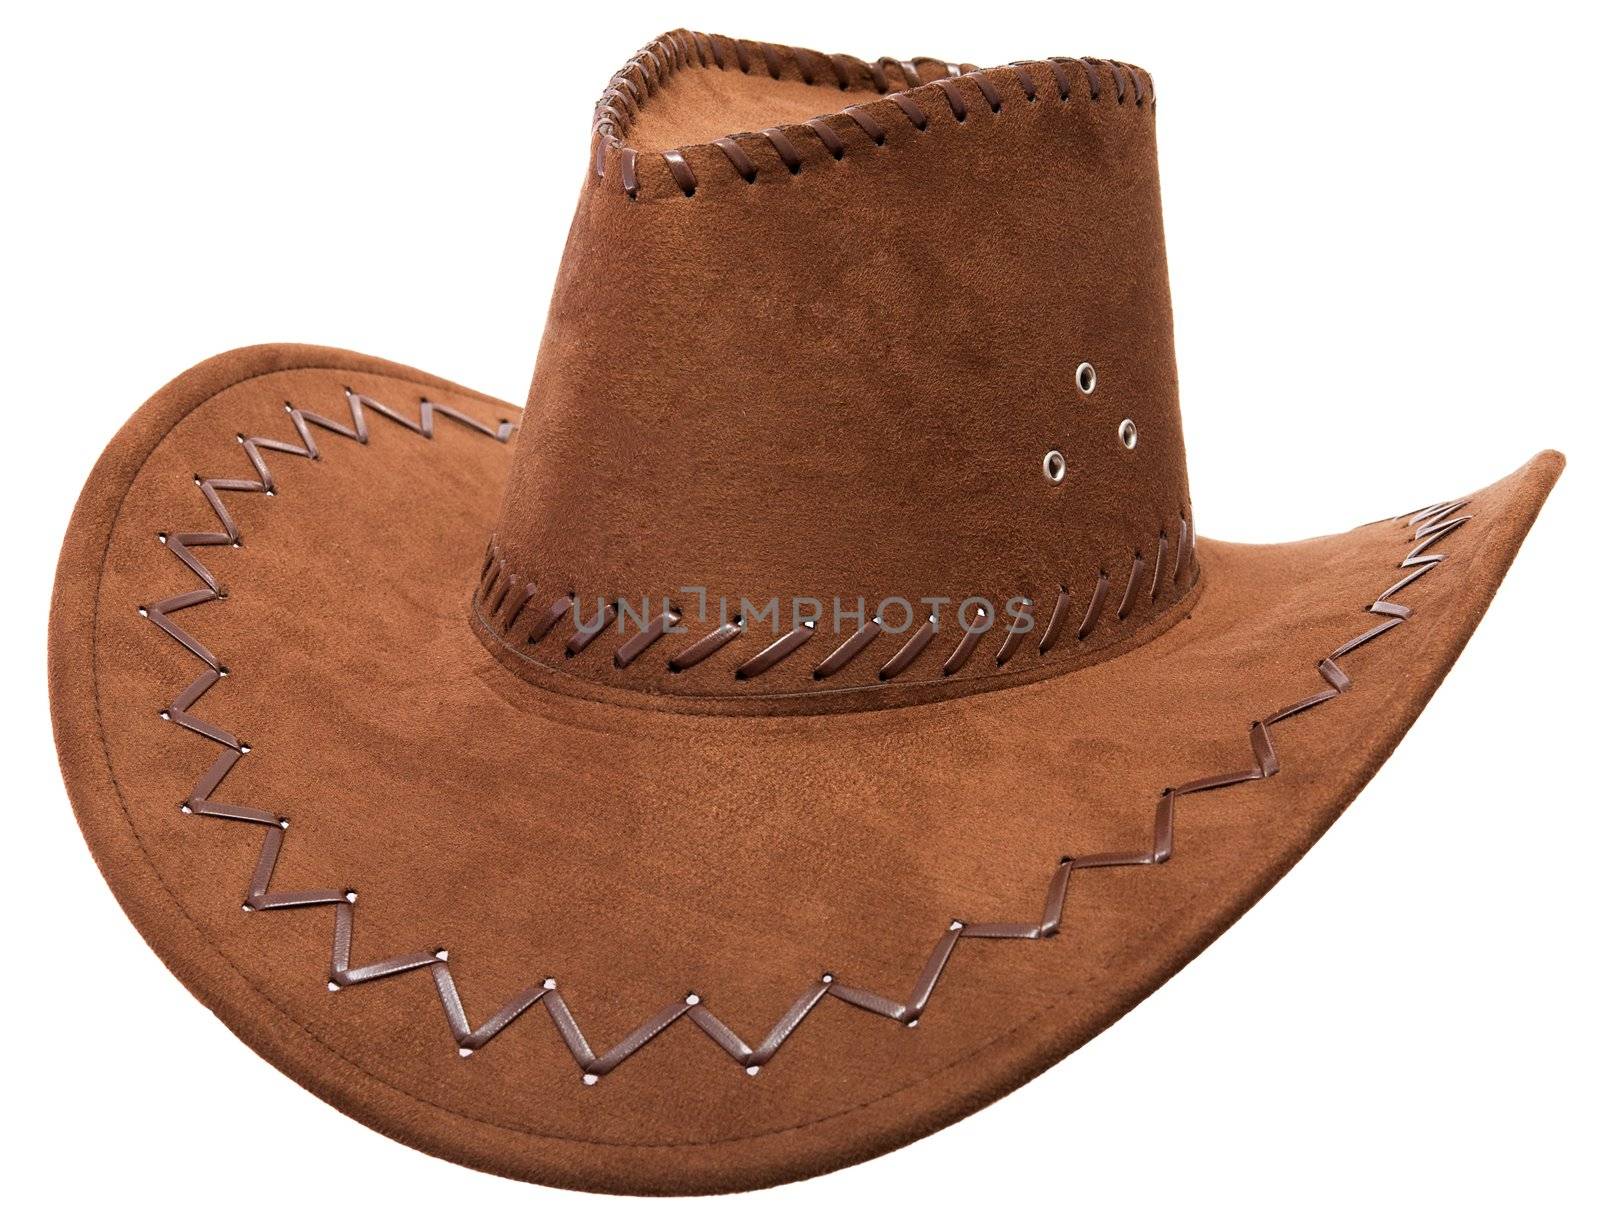 Lonely cowboy's hat on a white background